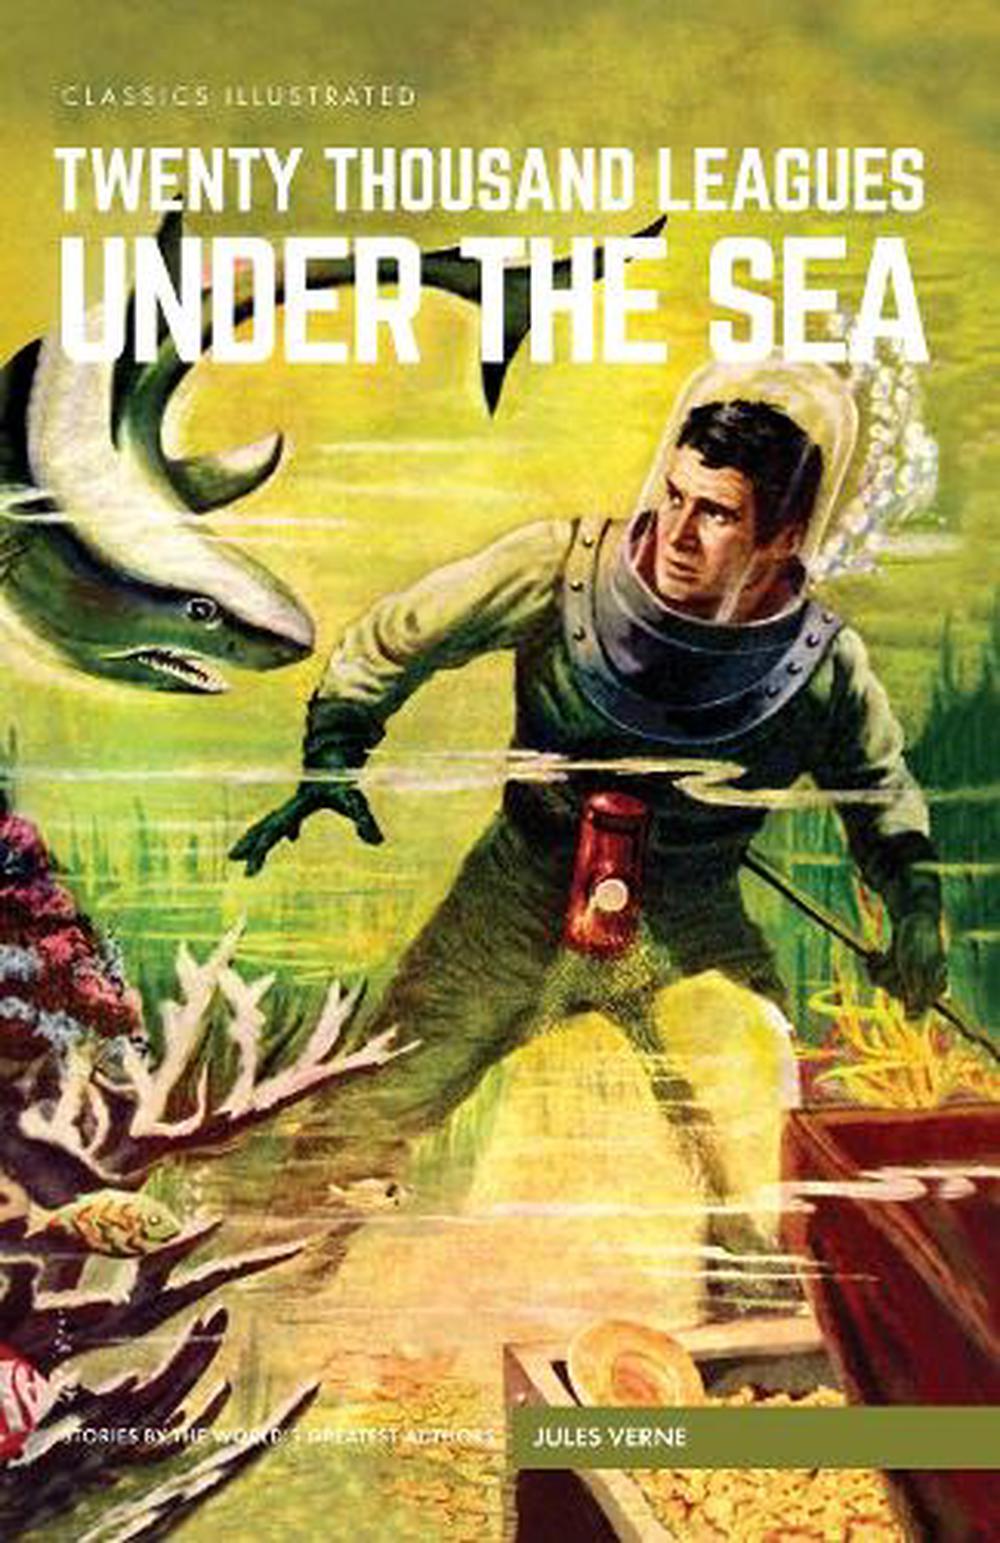 2000 leagues under the sea book